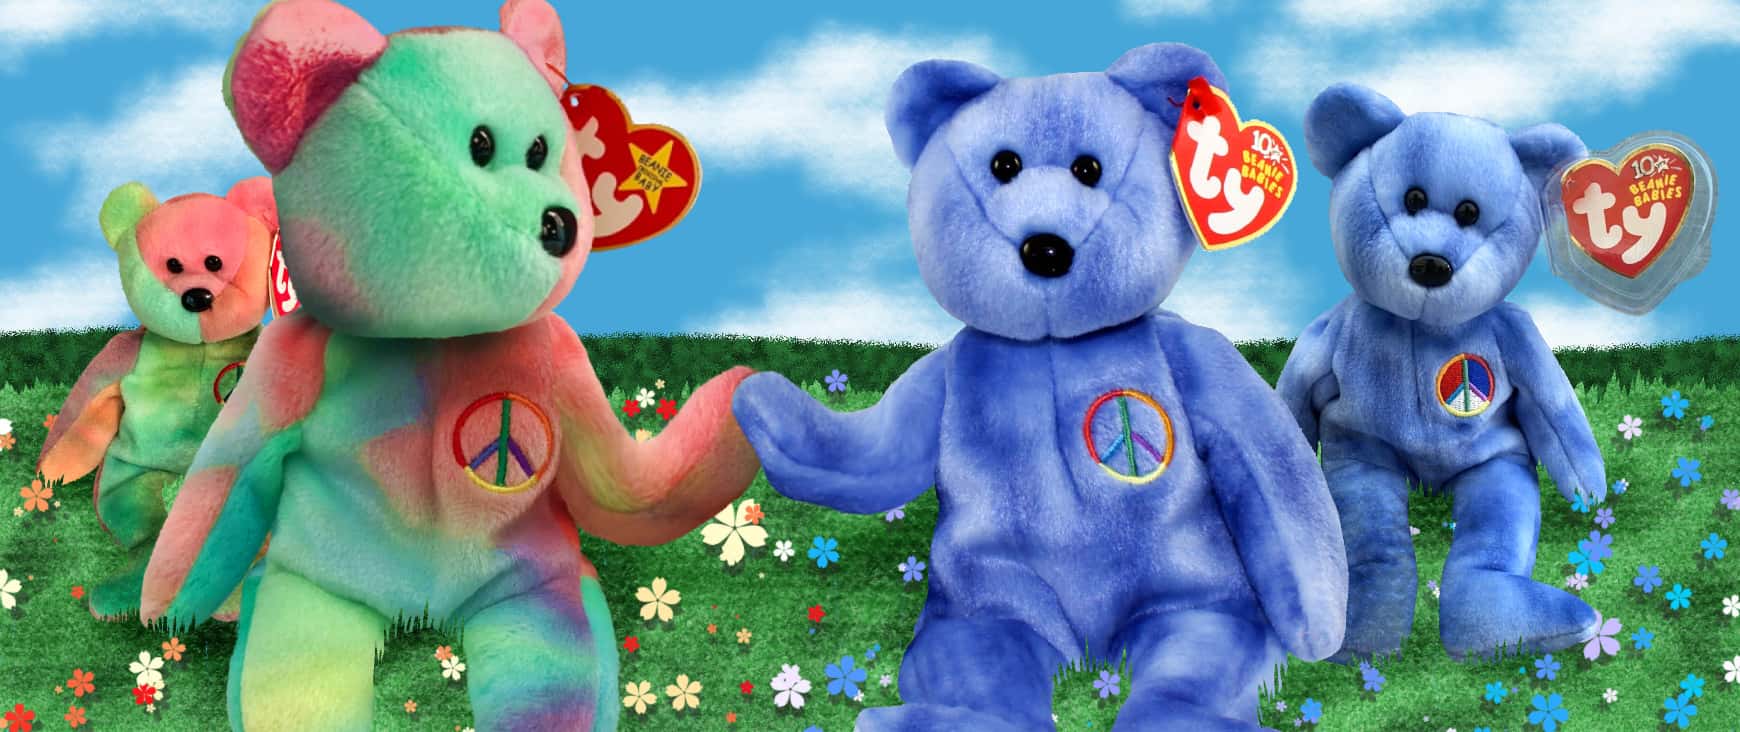 Different versions of Peace the Bear